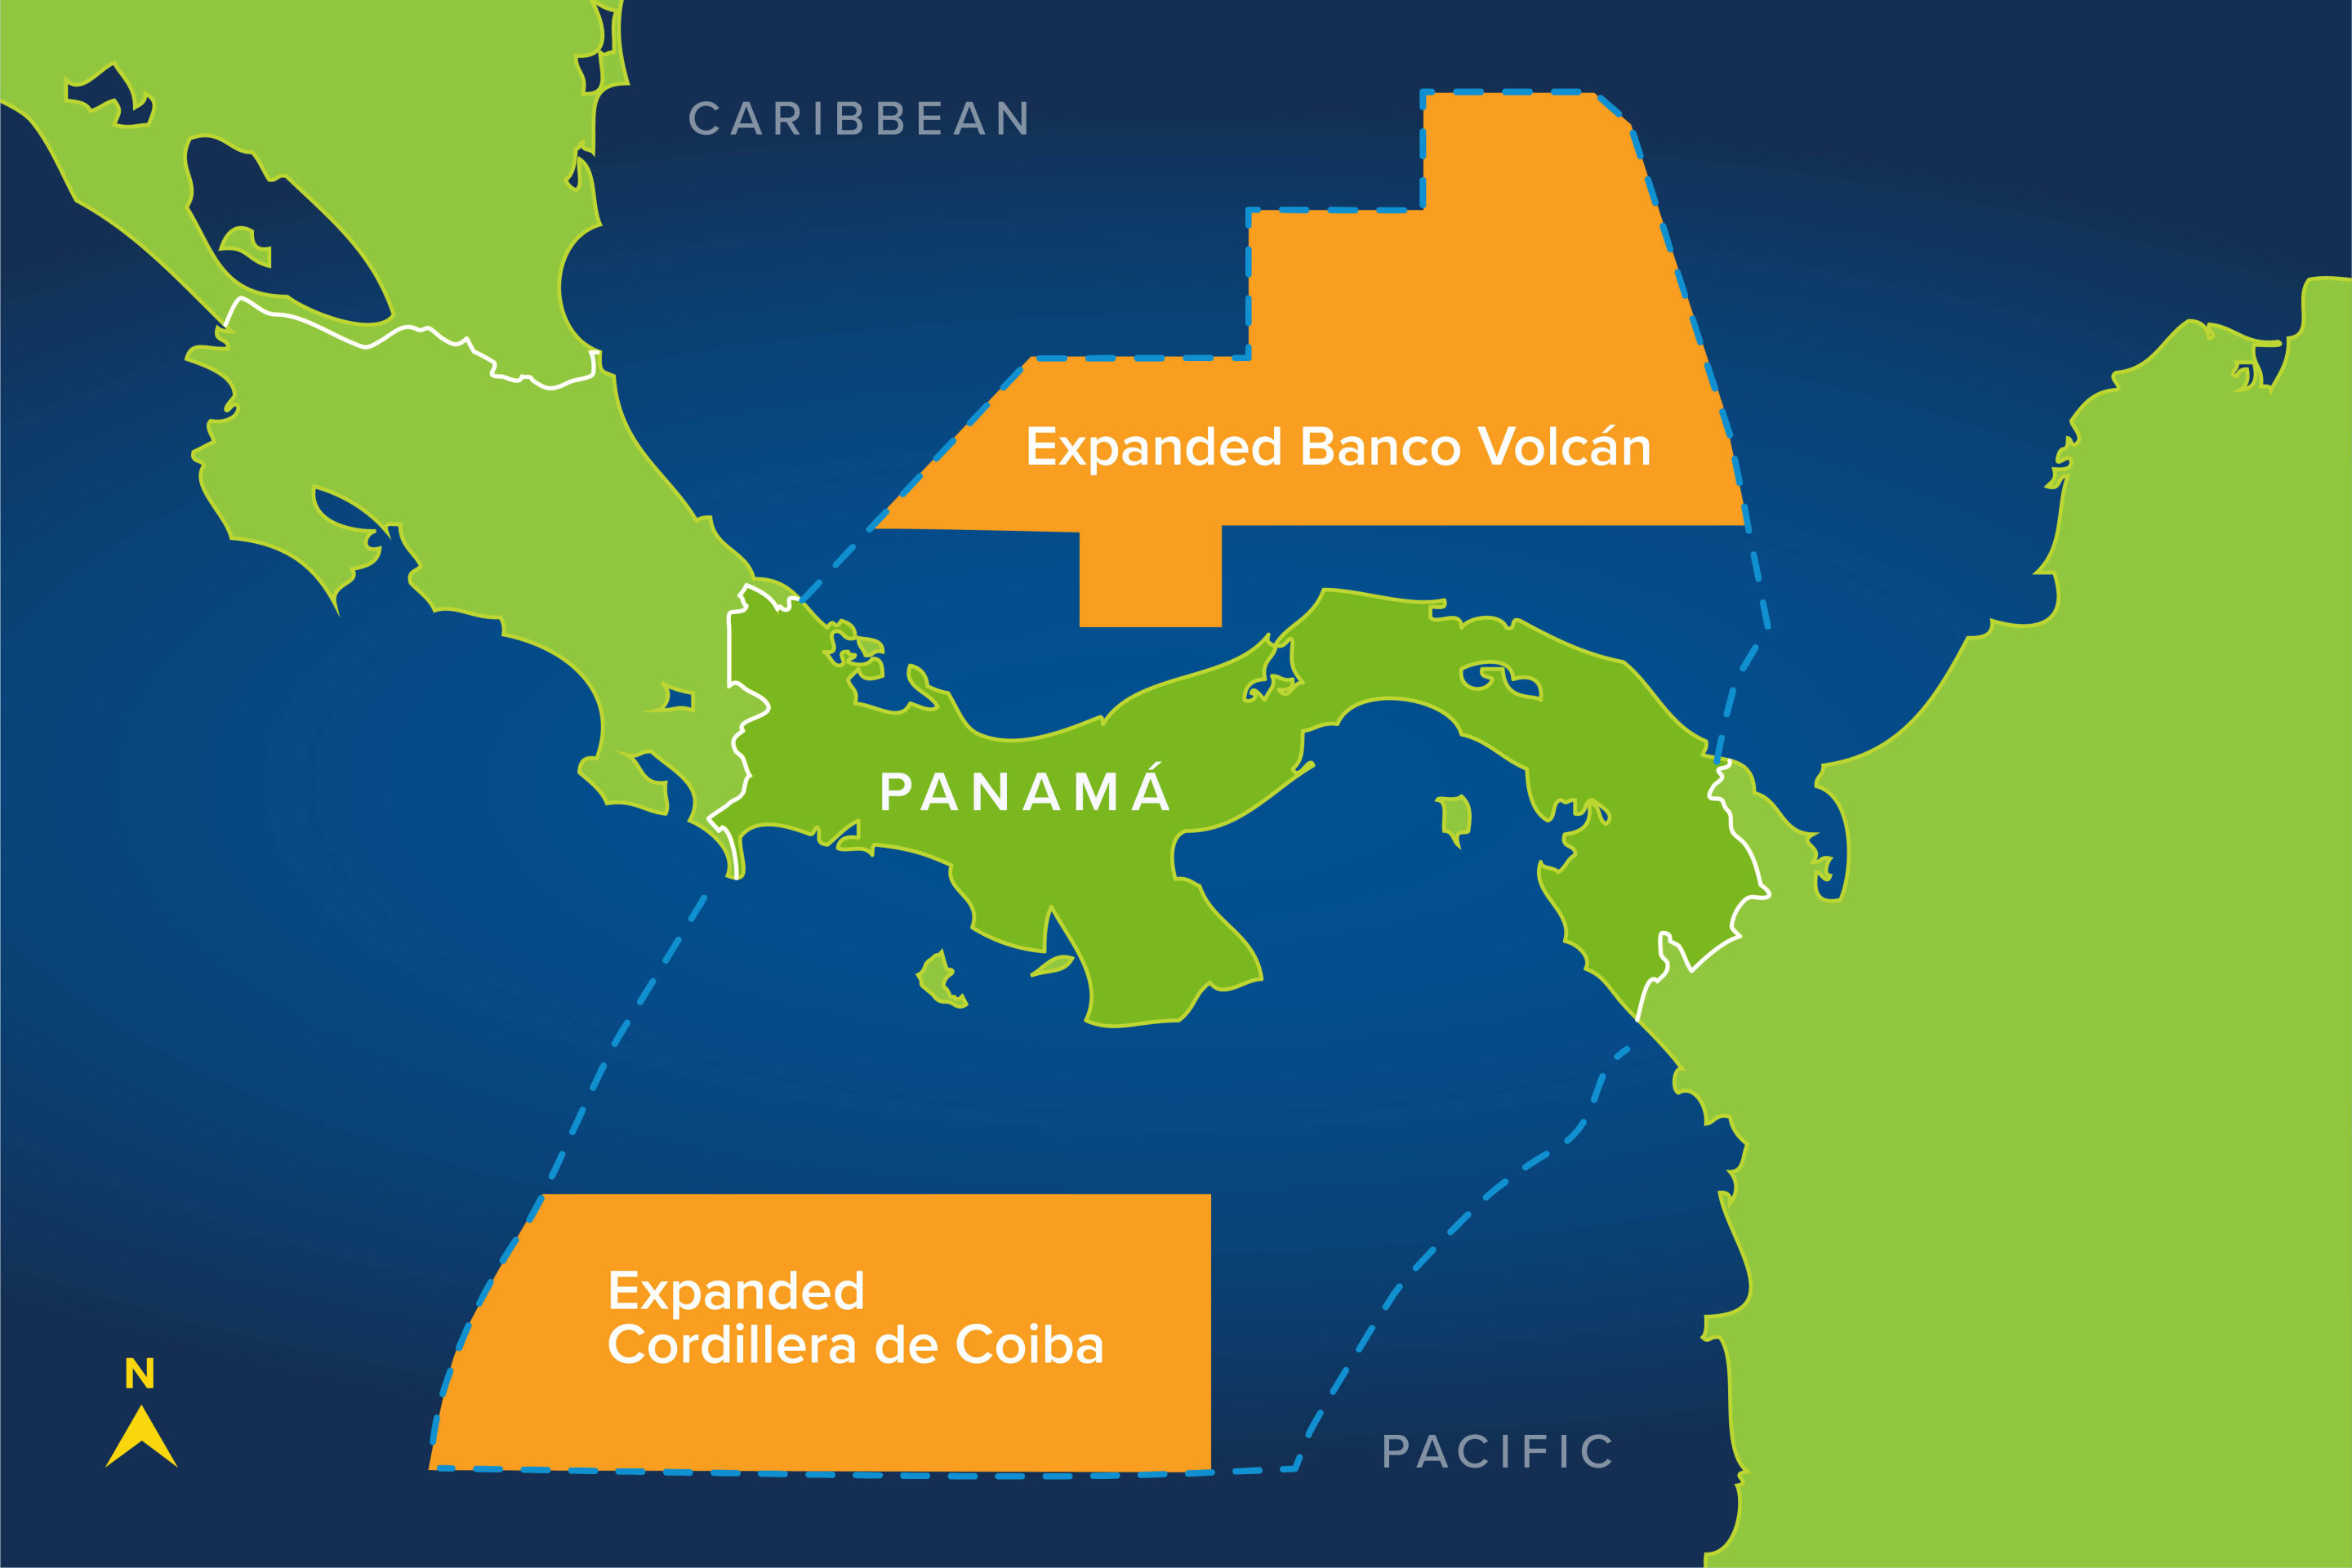 #Panama protects over 54% of its oceans with the expansion of Banco Volcán